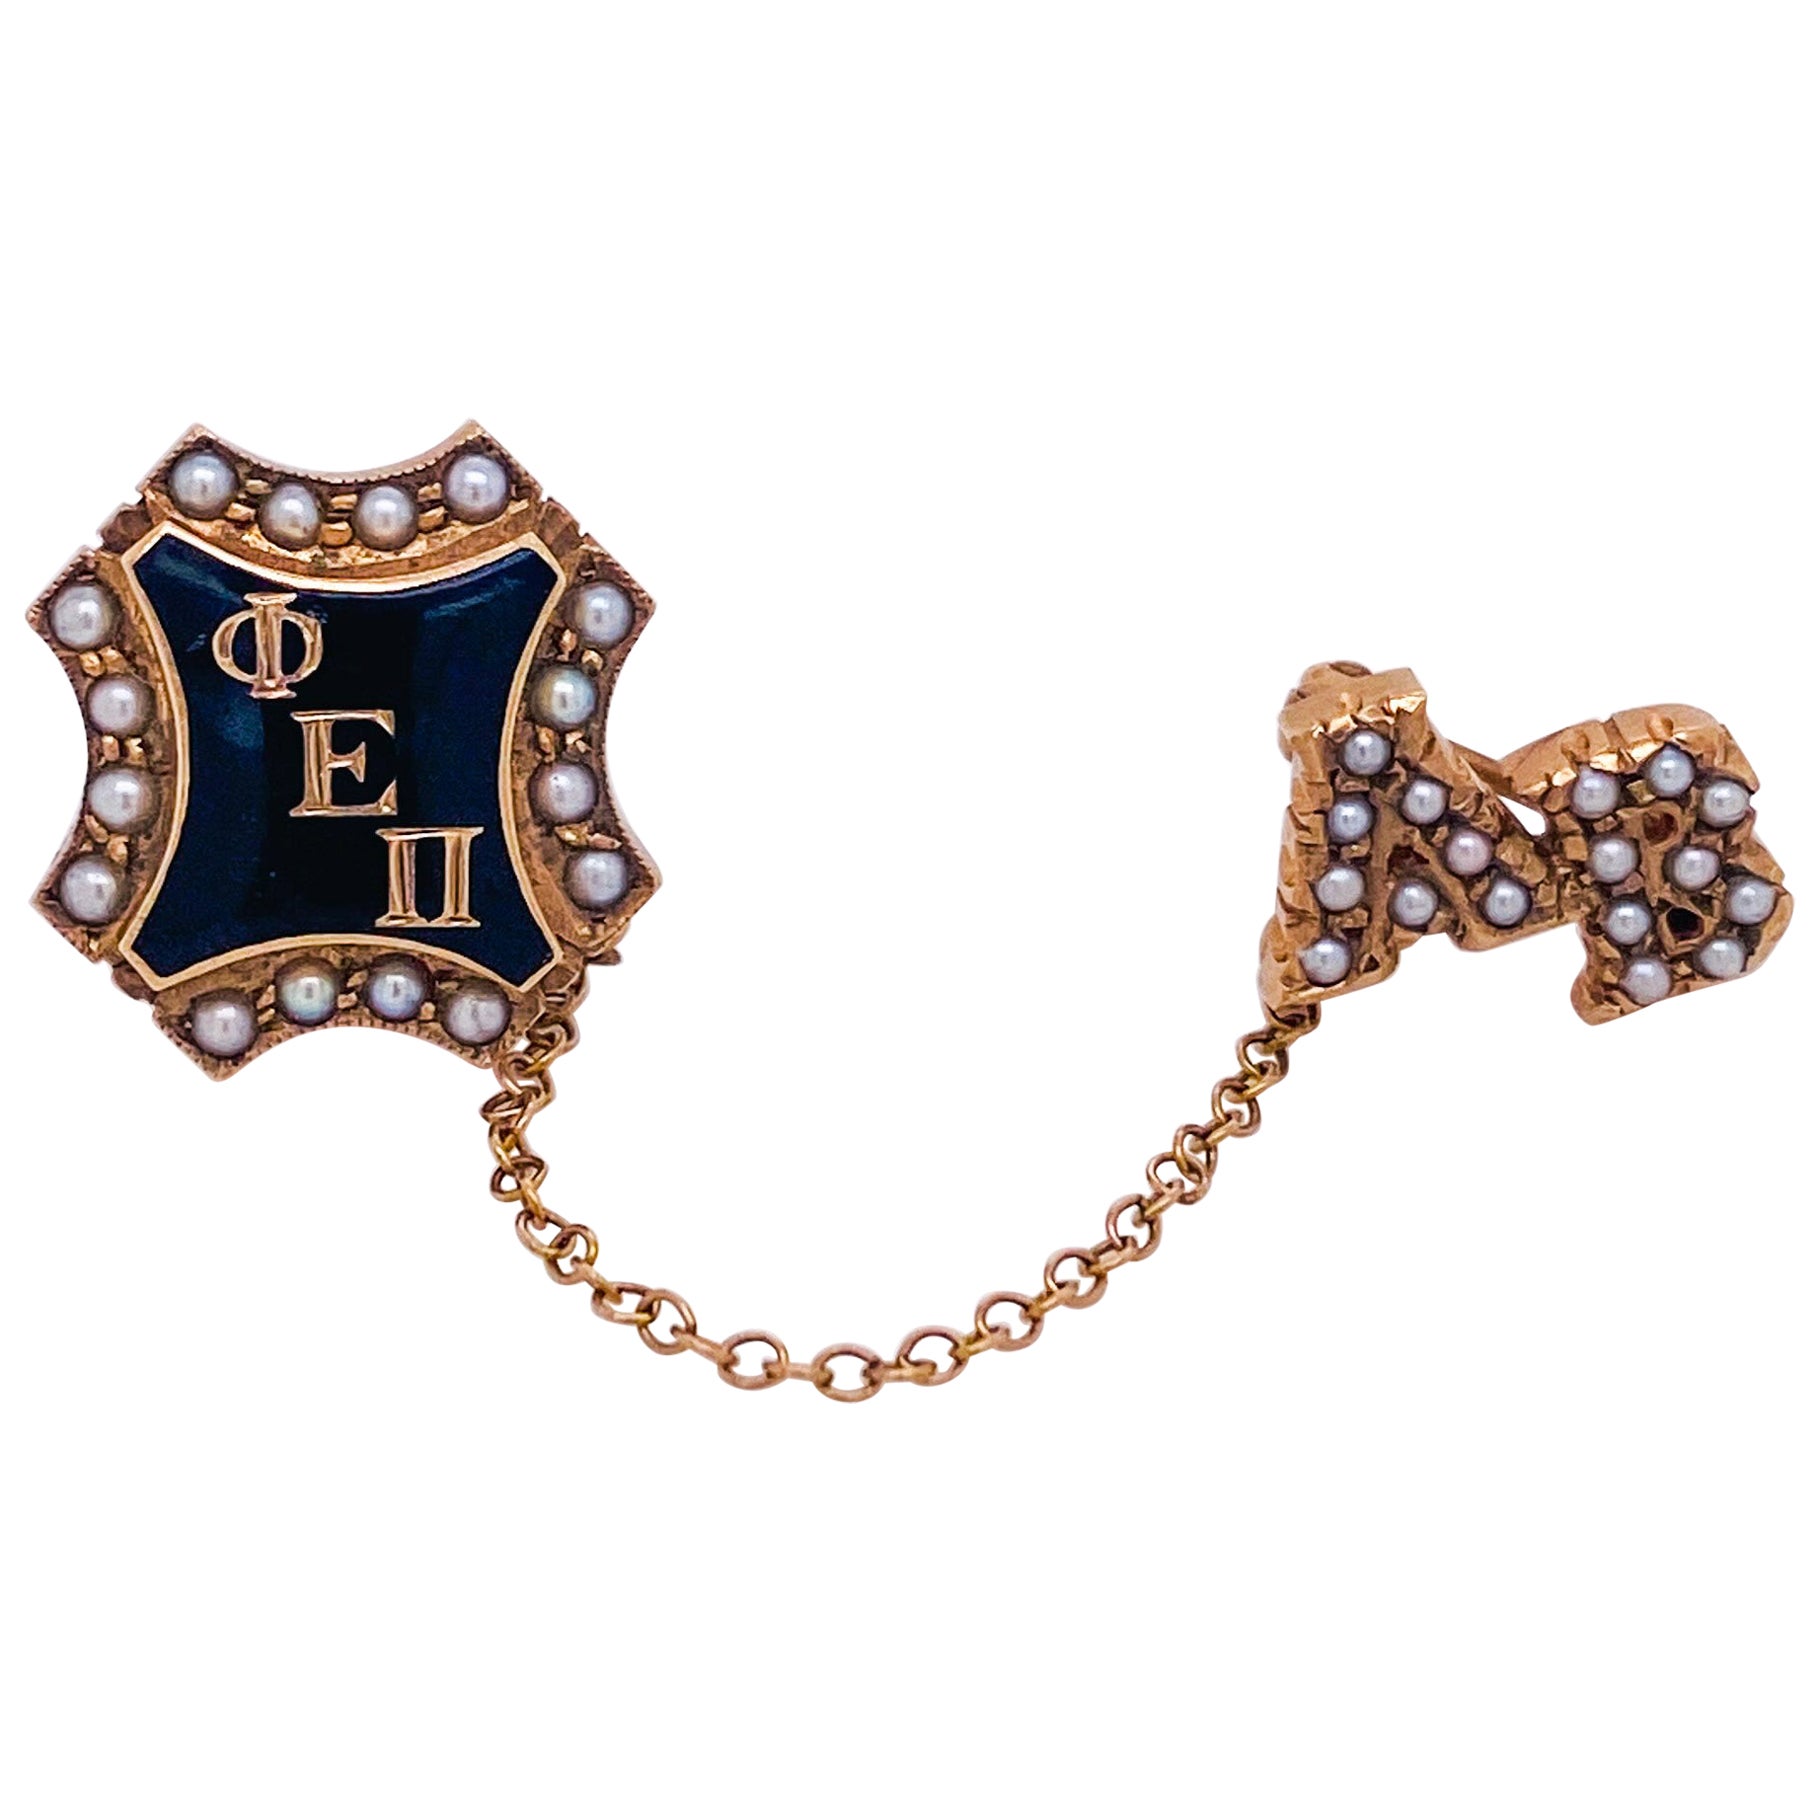 Phi Epsilon Pi, Alpha Beta Chapter Fraternity Pin Estate Brooch with Pearls For Sale